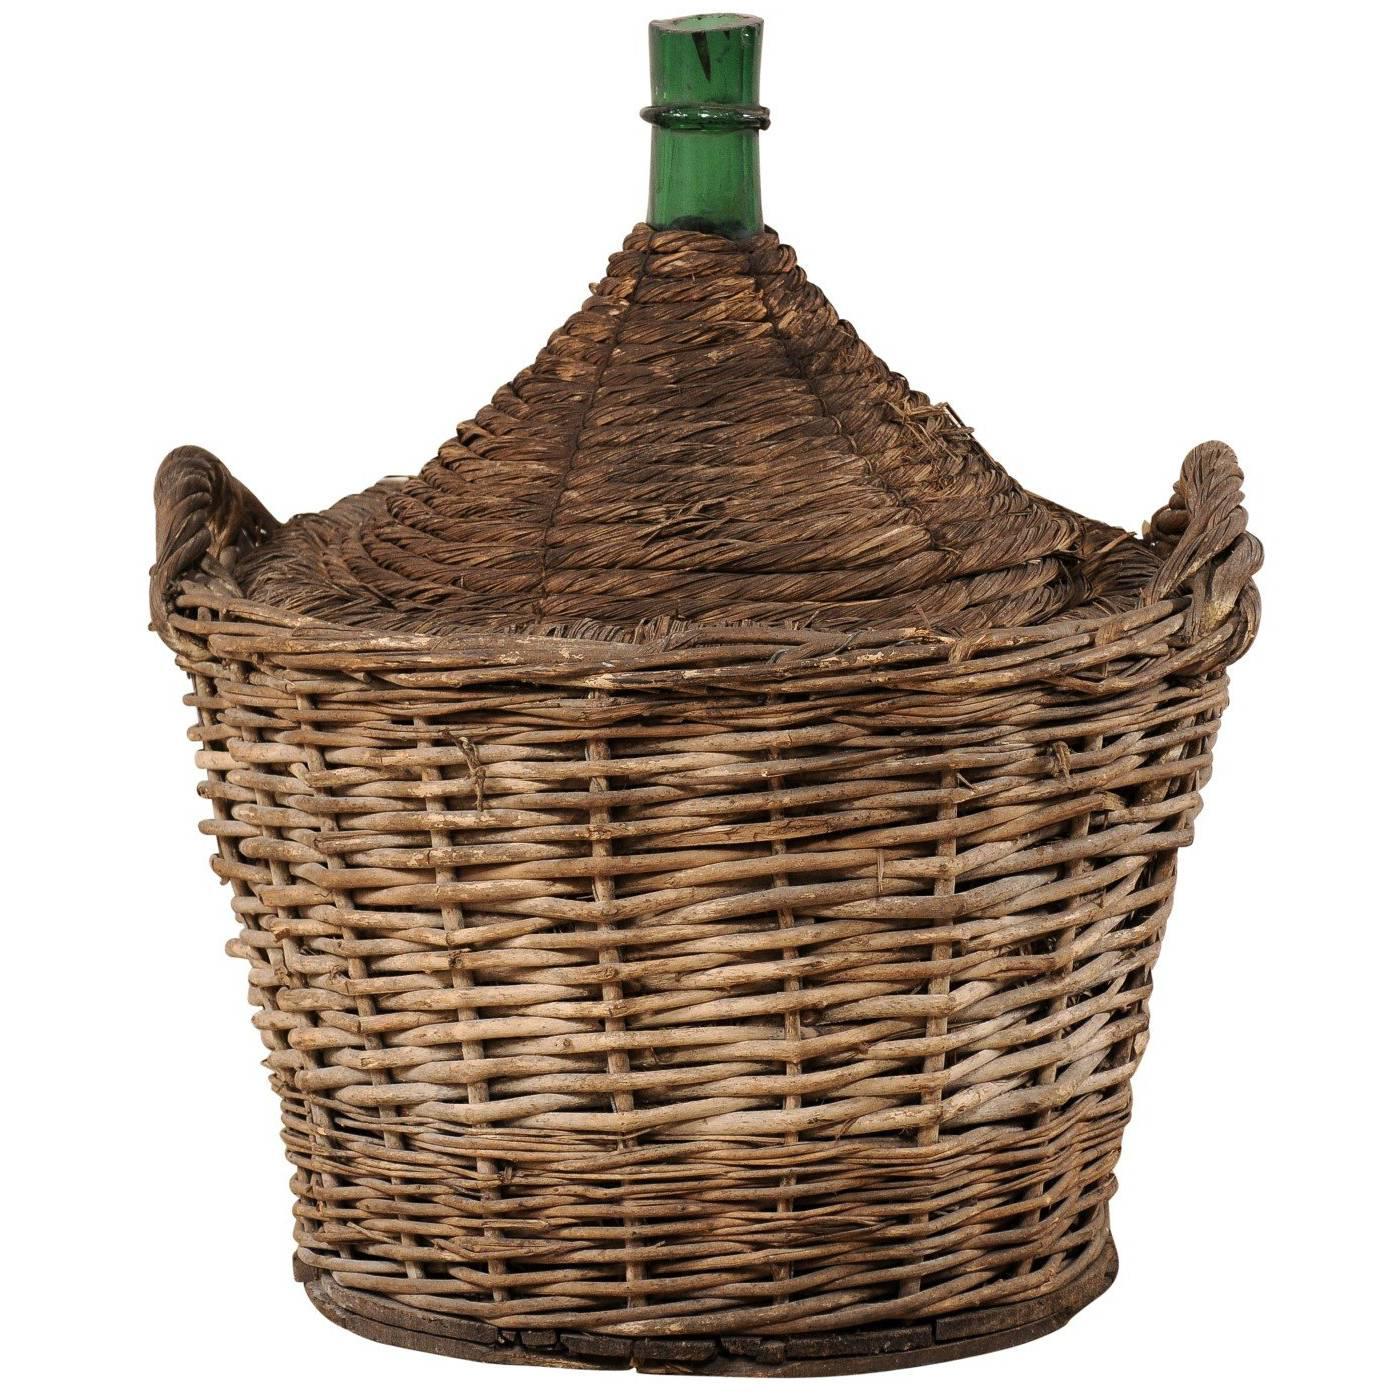 French Mid-Century Handwoven Basket with a Large Demijohn Glass Wine Bottle